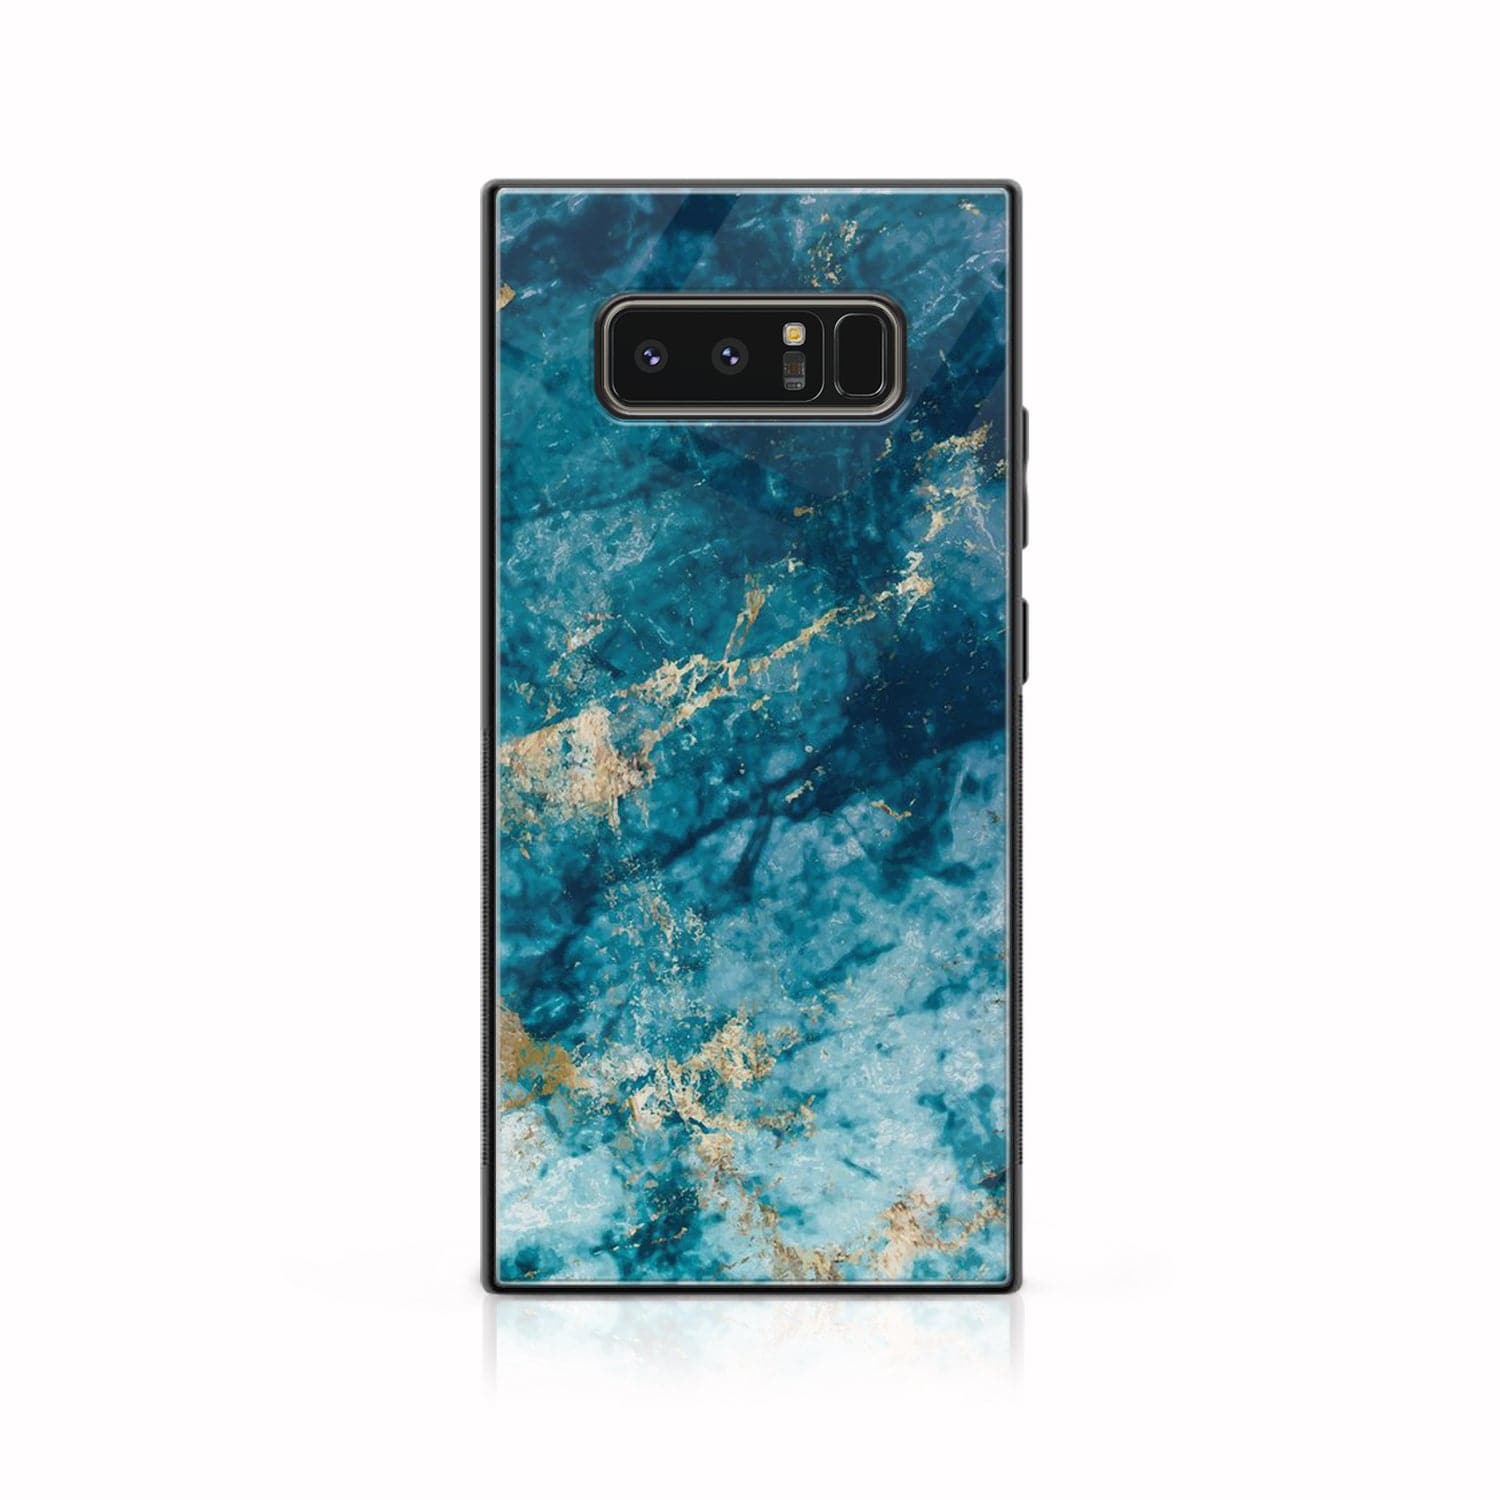 Galaxy Note 8 - Blue Marble Series - Premium Printed Glass soft Bumper shock Proof Case